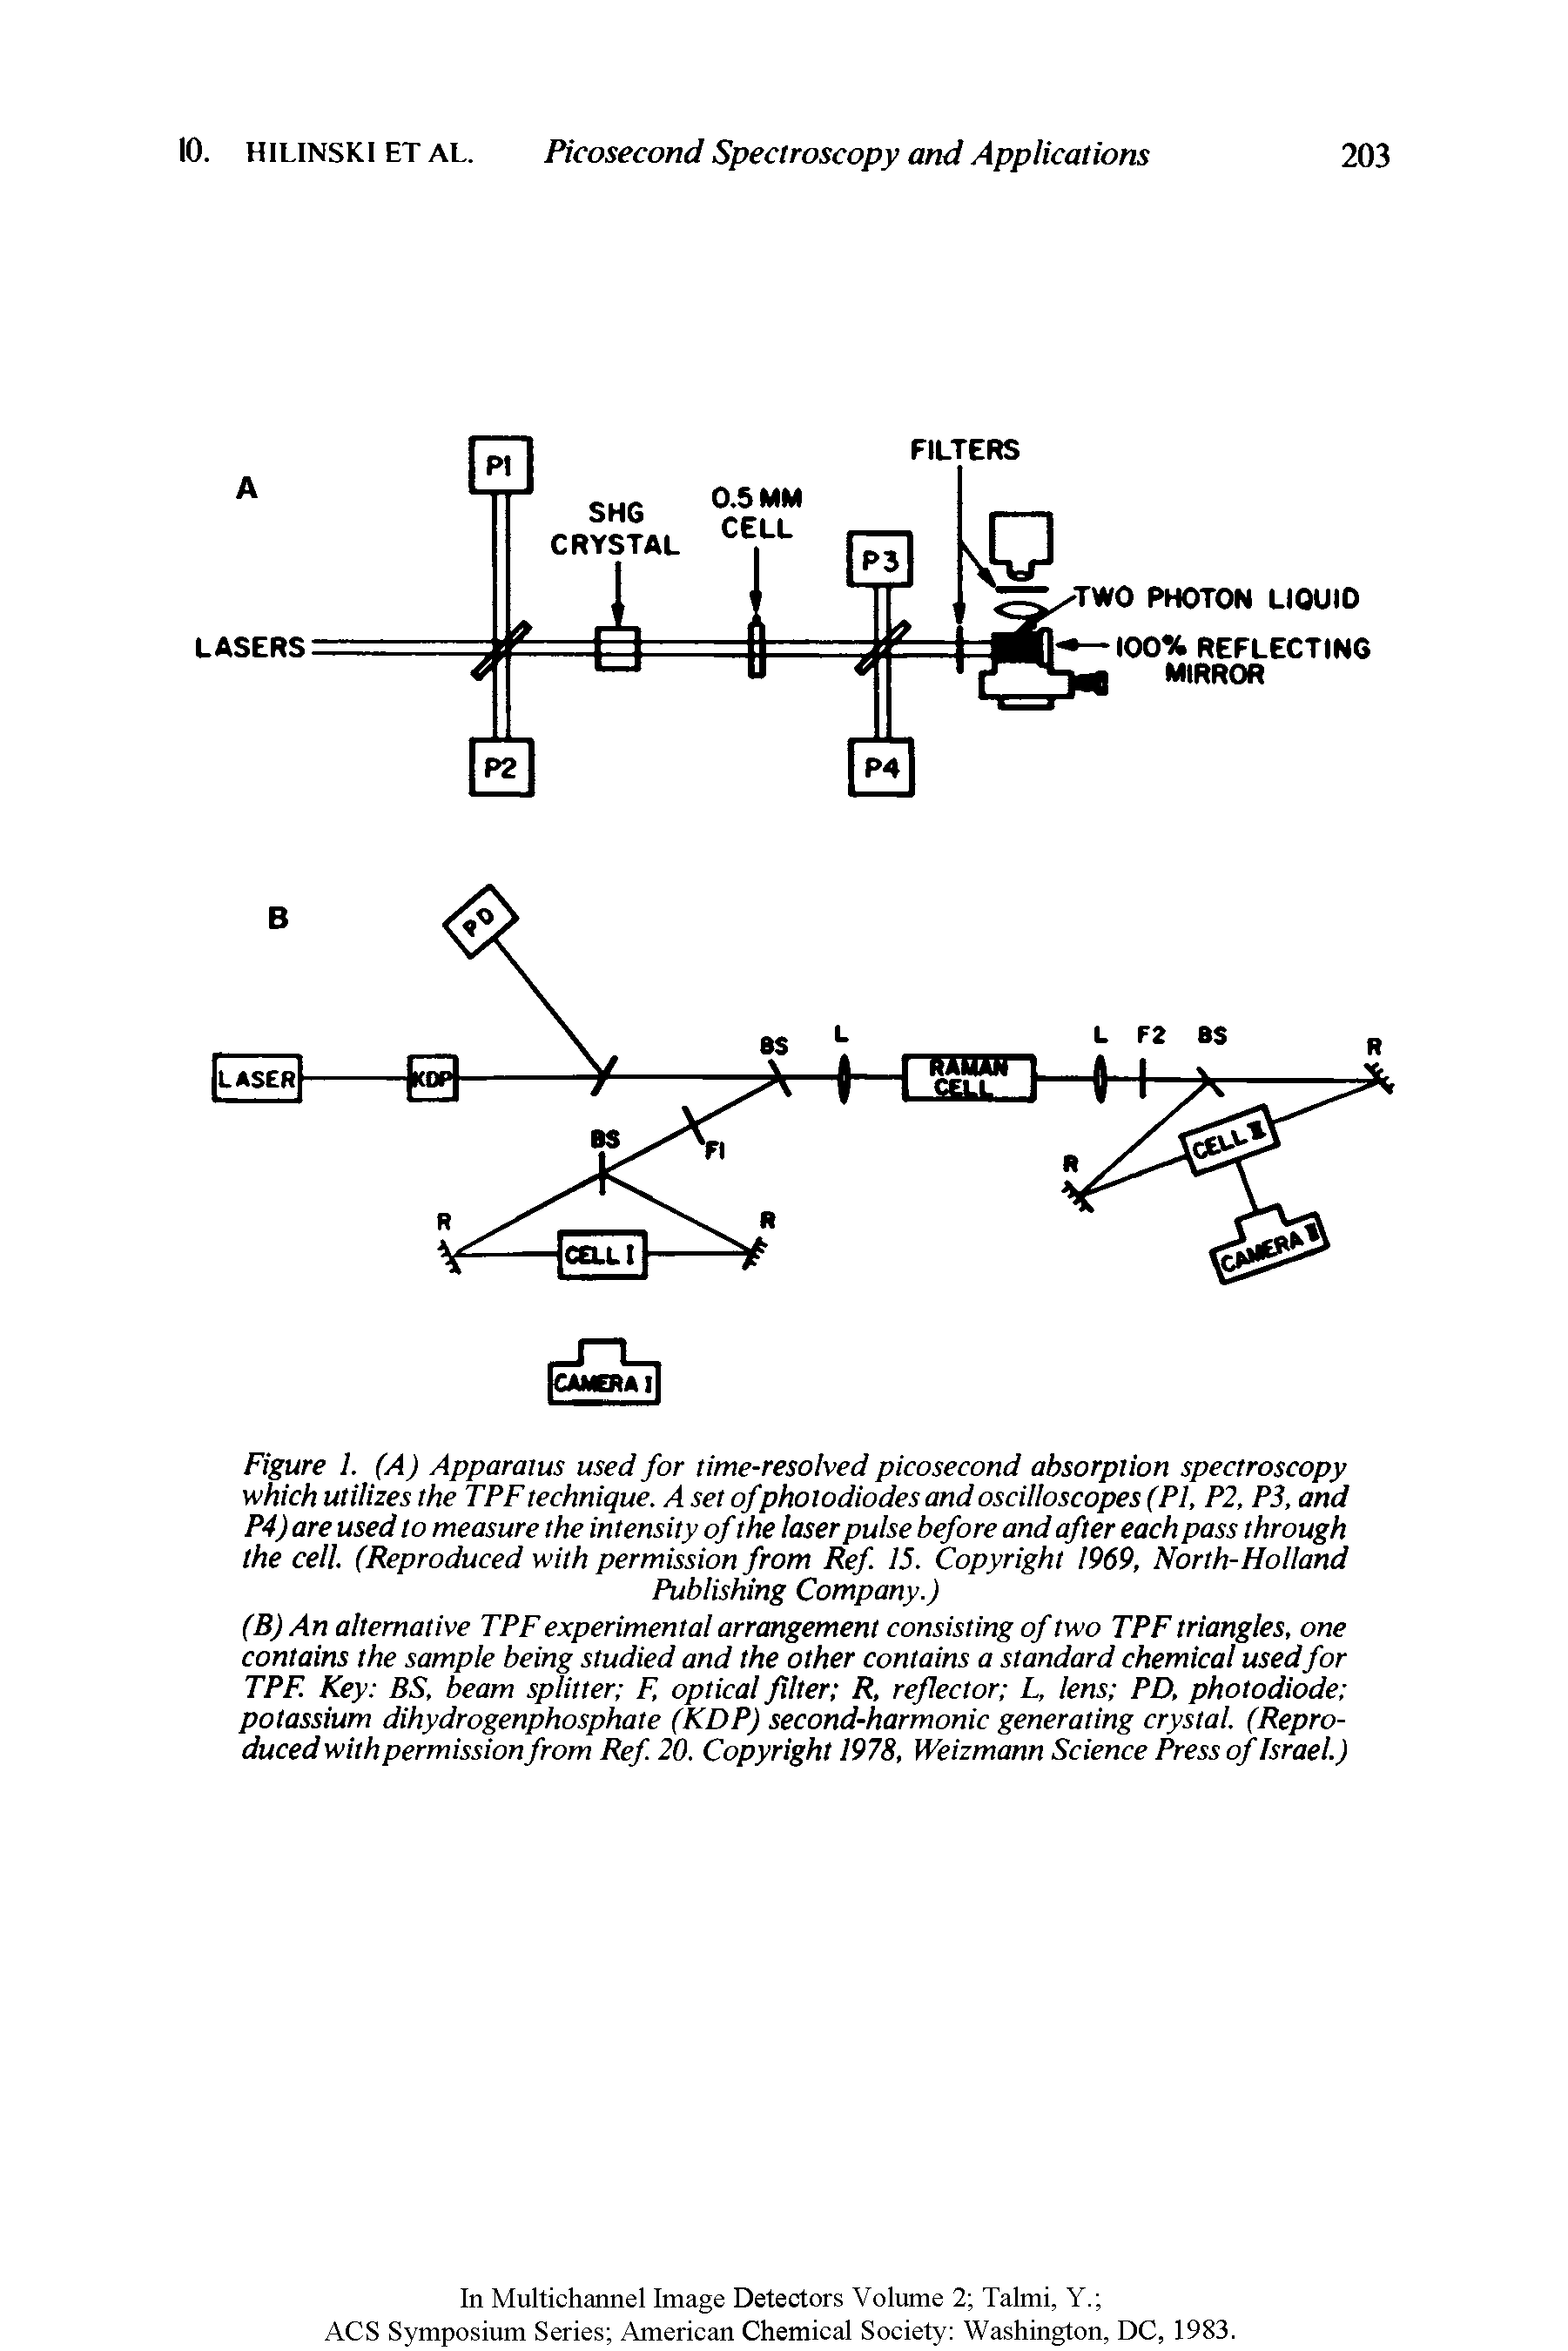 Figure 1. (A) Apparatus used for time-resolved picosecond absorption spectroscopy which utilizes the TPF technique. A set ofphotodiodes and oscilloscopes (PI, P2, P3, and P4)are used to measure the intensity of the laser pulse before and after each pass through the cell. (Reproduced with permission from Ref 15. Copyright 1969, North-Holland...